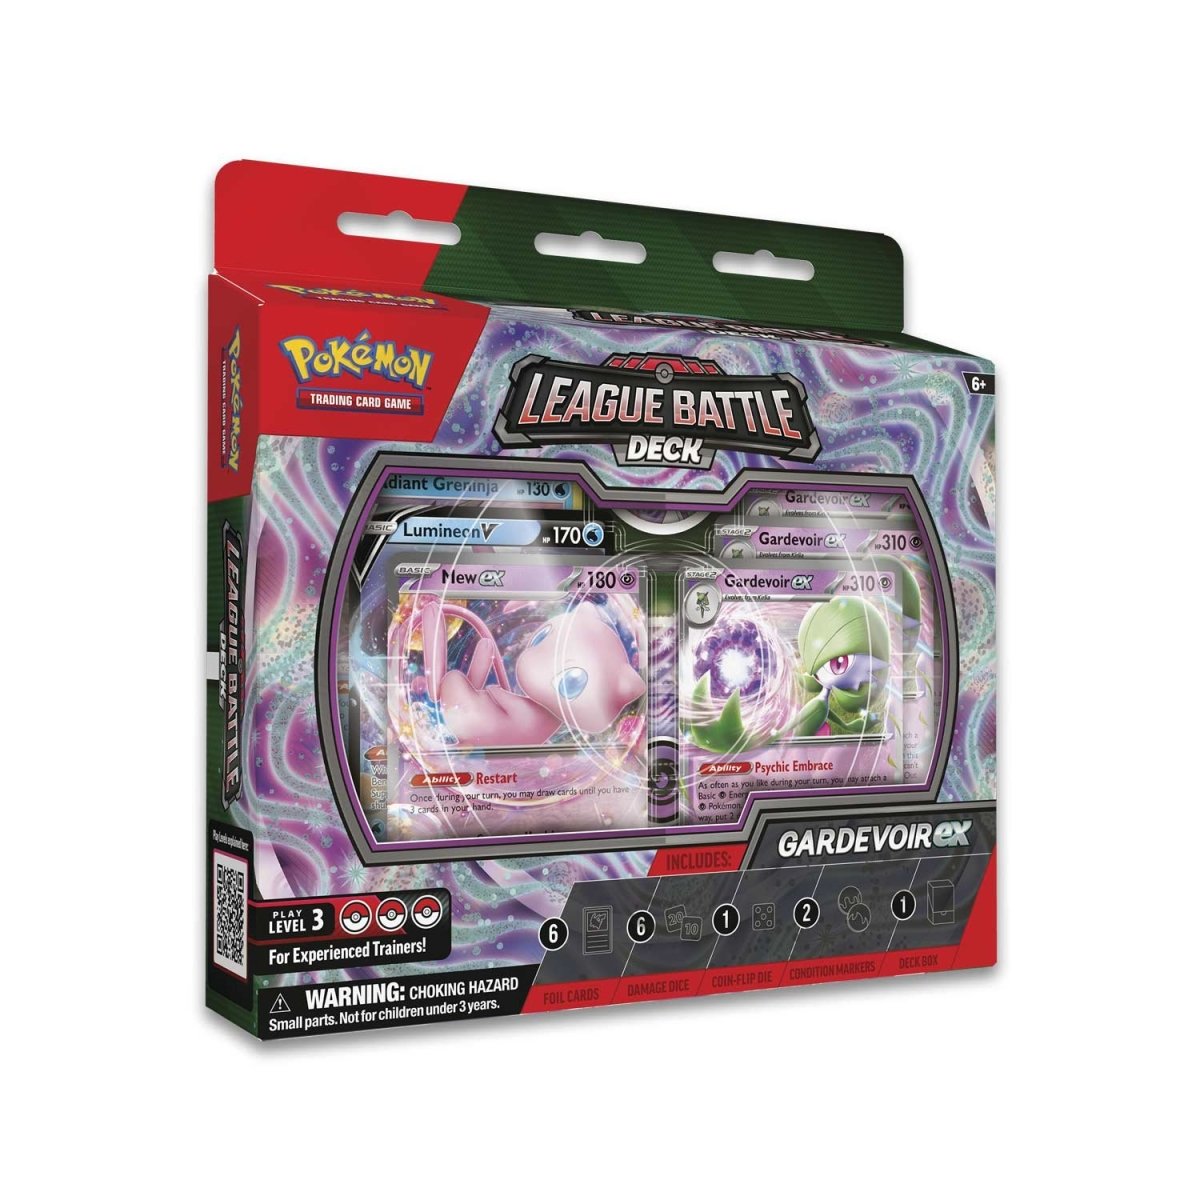 Zephyr Epic - Armarouge ex Premium Collection - $42.99 (MSRP $51.99) zephyrepic.com/product/pokemo… Gardevoir ex League Battle Deck - $29.99 (MSRP $38.99) zephyrepic.com/product/pokemo… Free shipping over $50 #ad Discord: bit.ly/3RvqtET